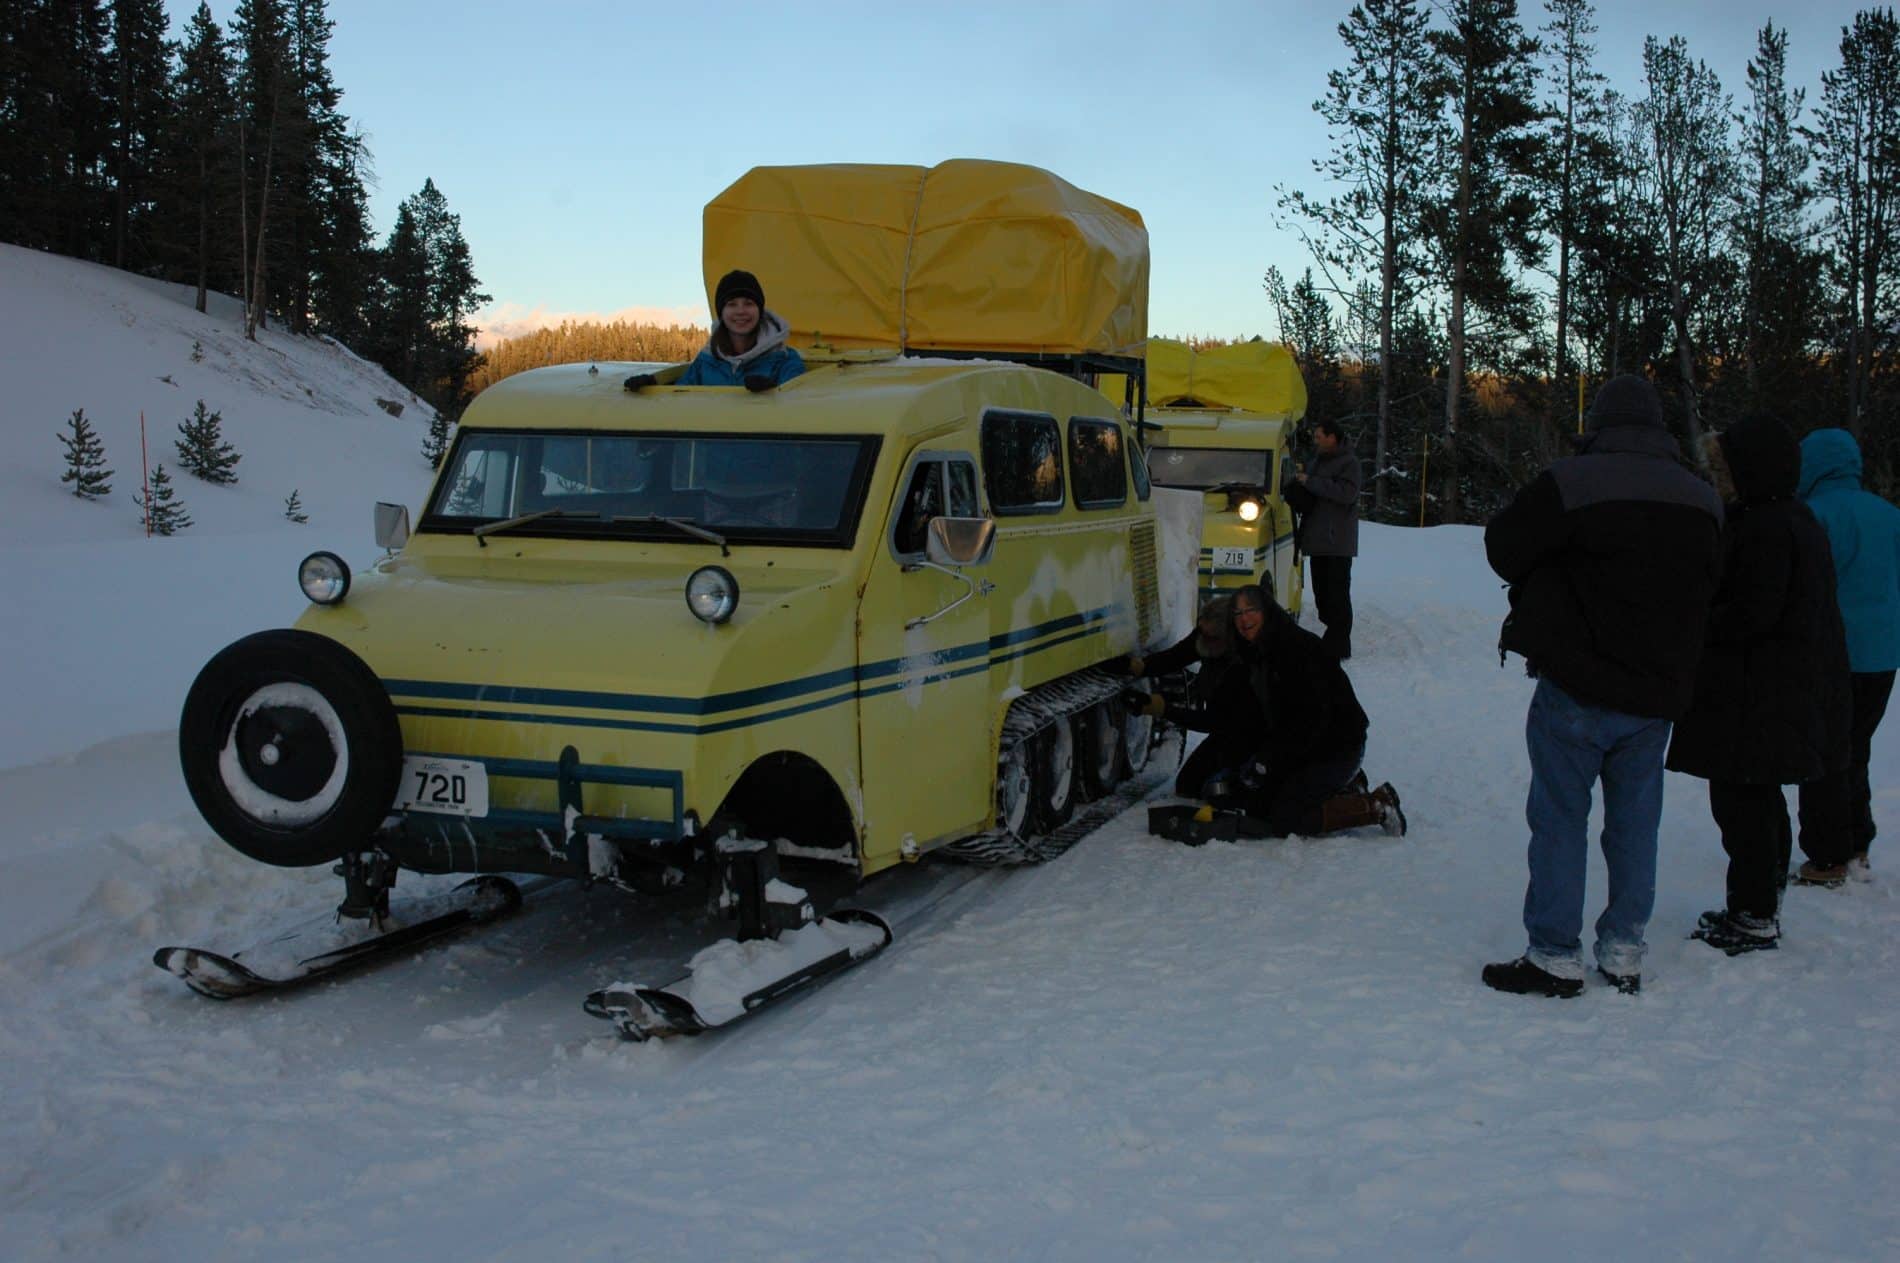 A ride on the Old Bombadier shuttle into Yellowstone National Park in winter